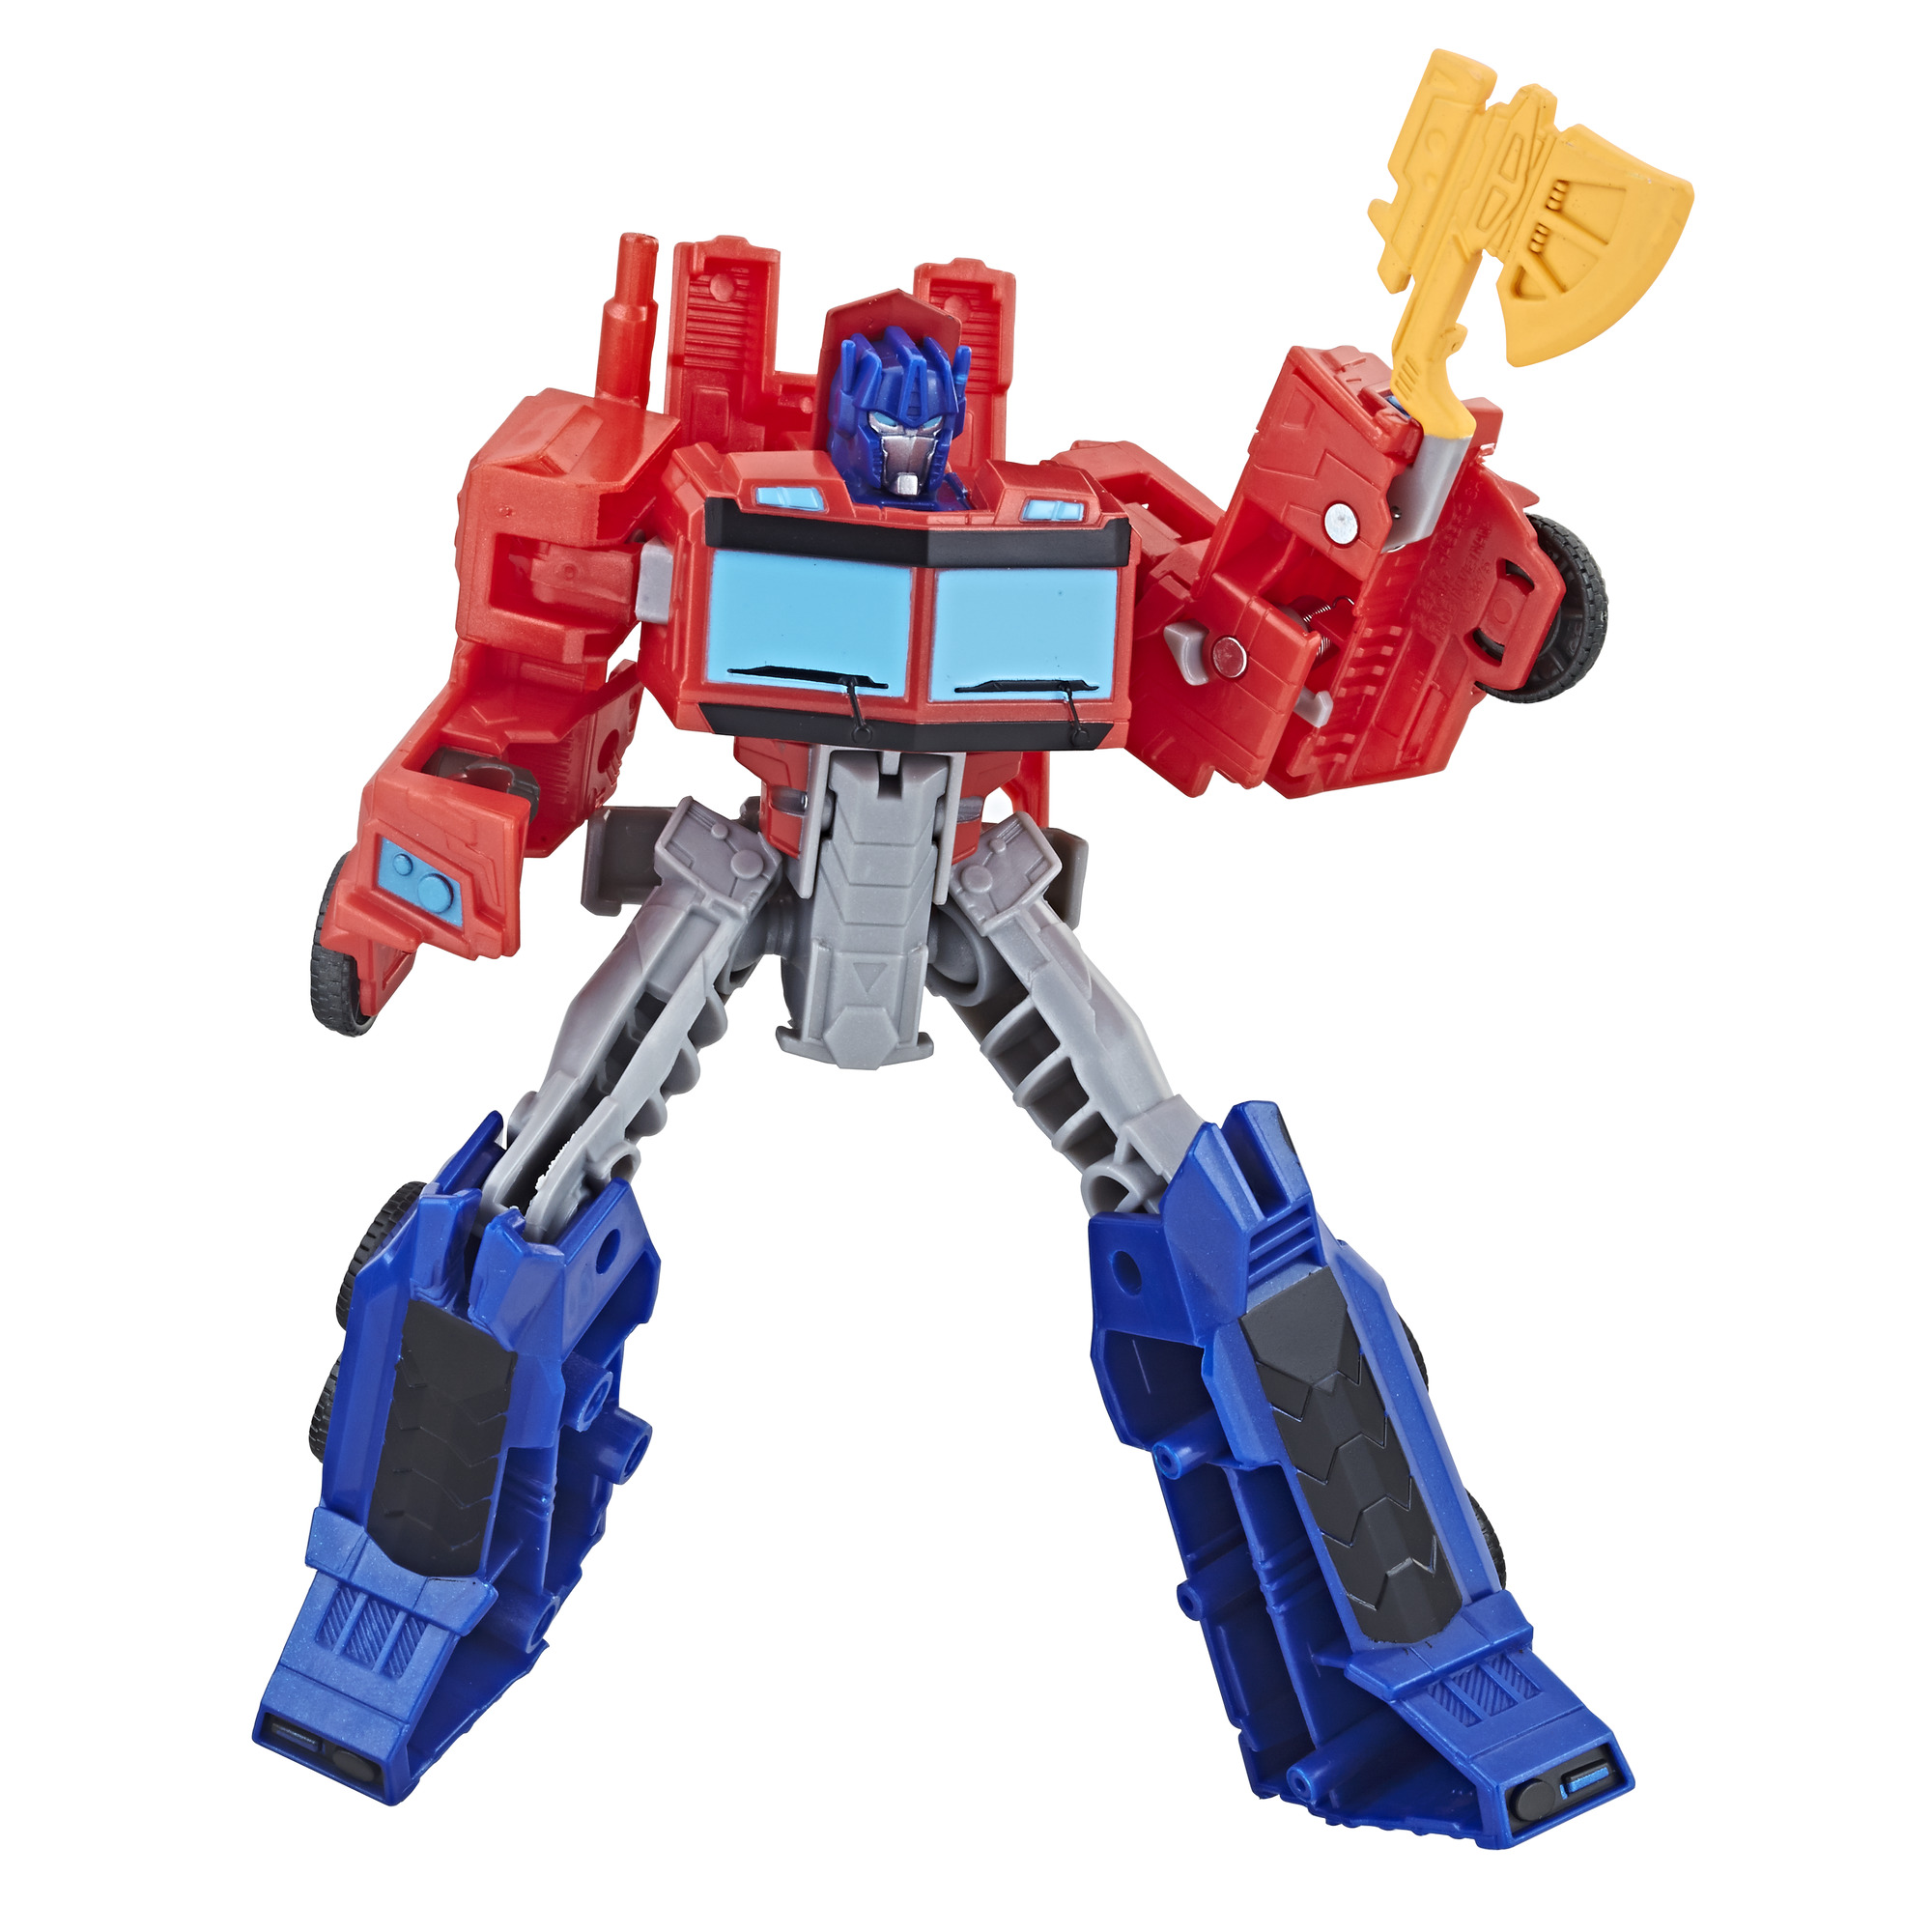 Transformers Cyberverse Warrior Class Optimus Prime - image 1 of 12